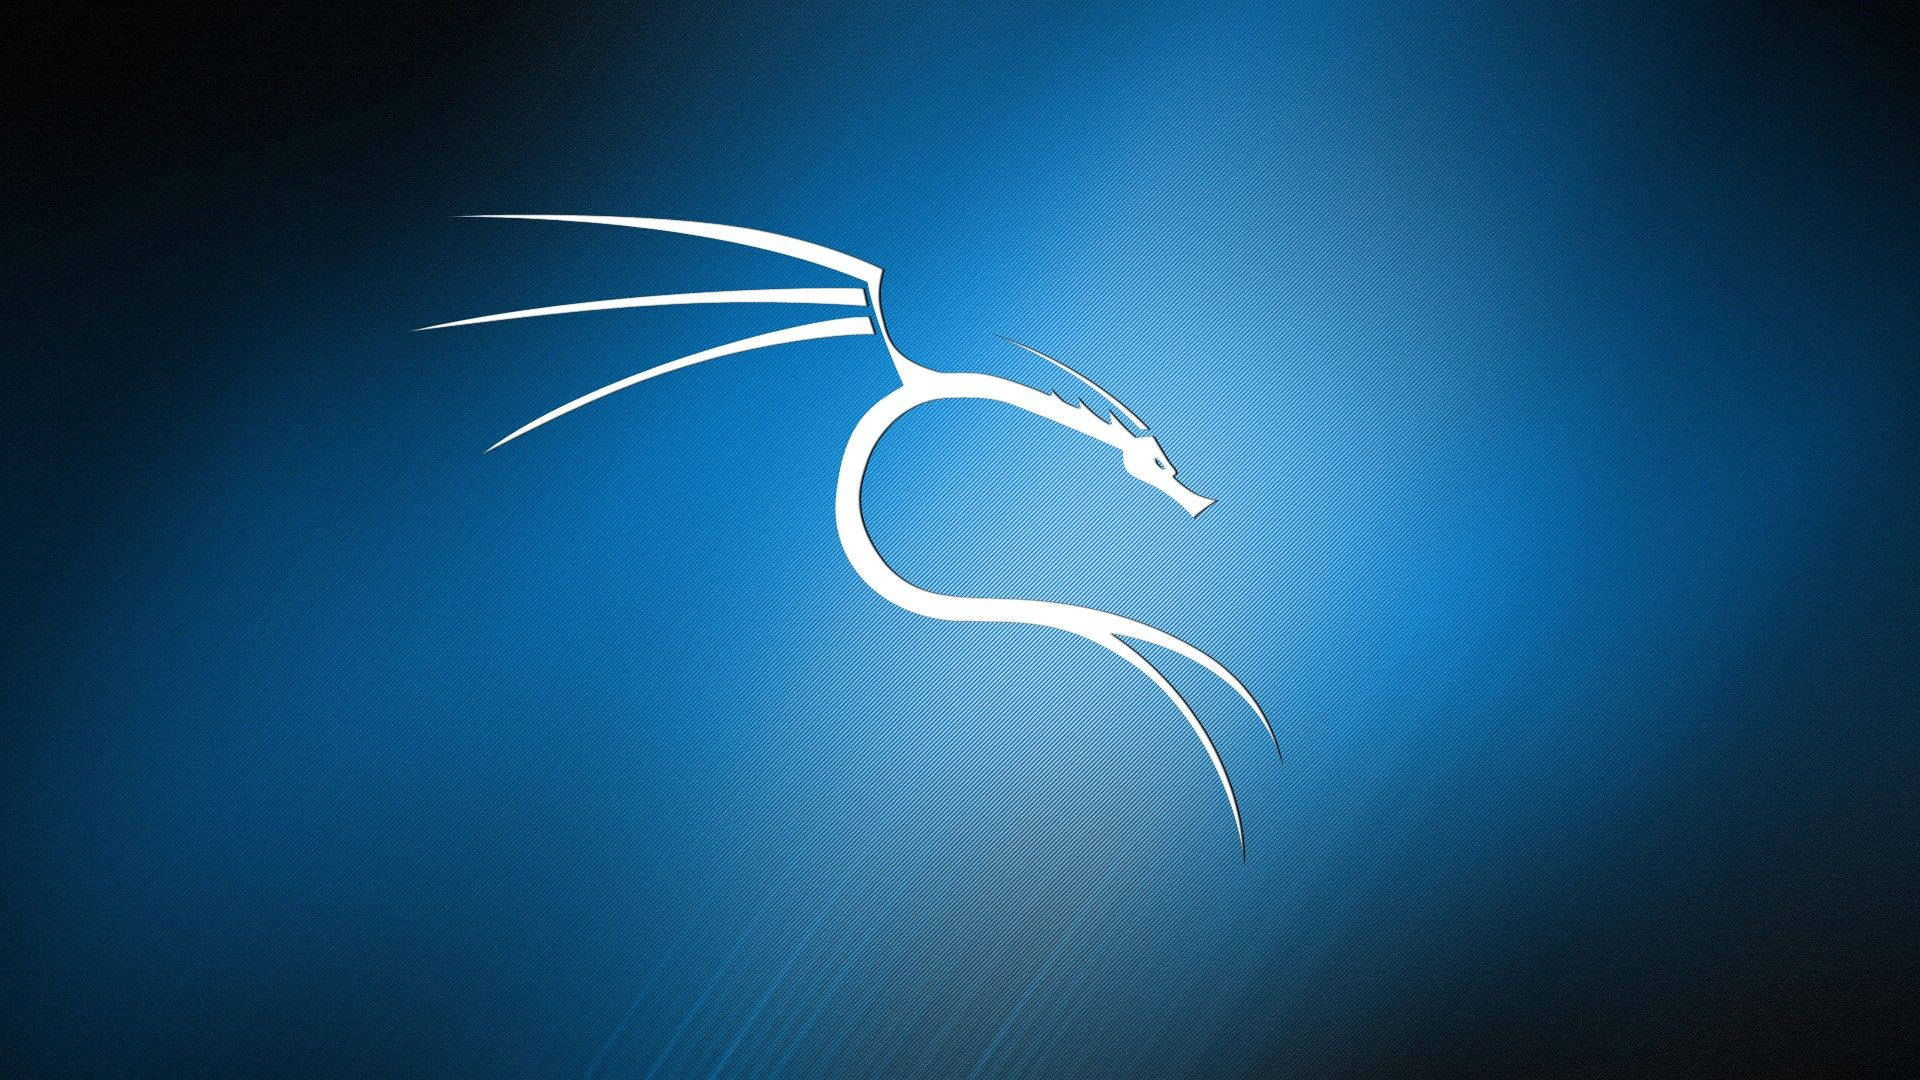 1920X1080 Kali Linux Wallpaper and Background